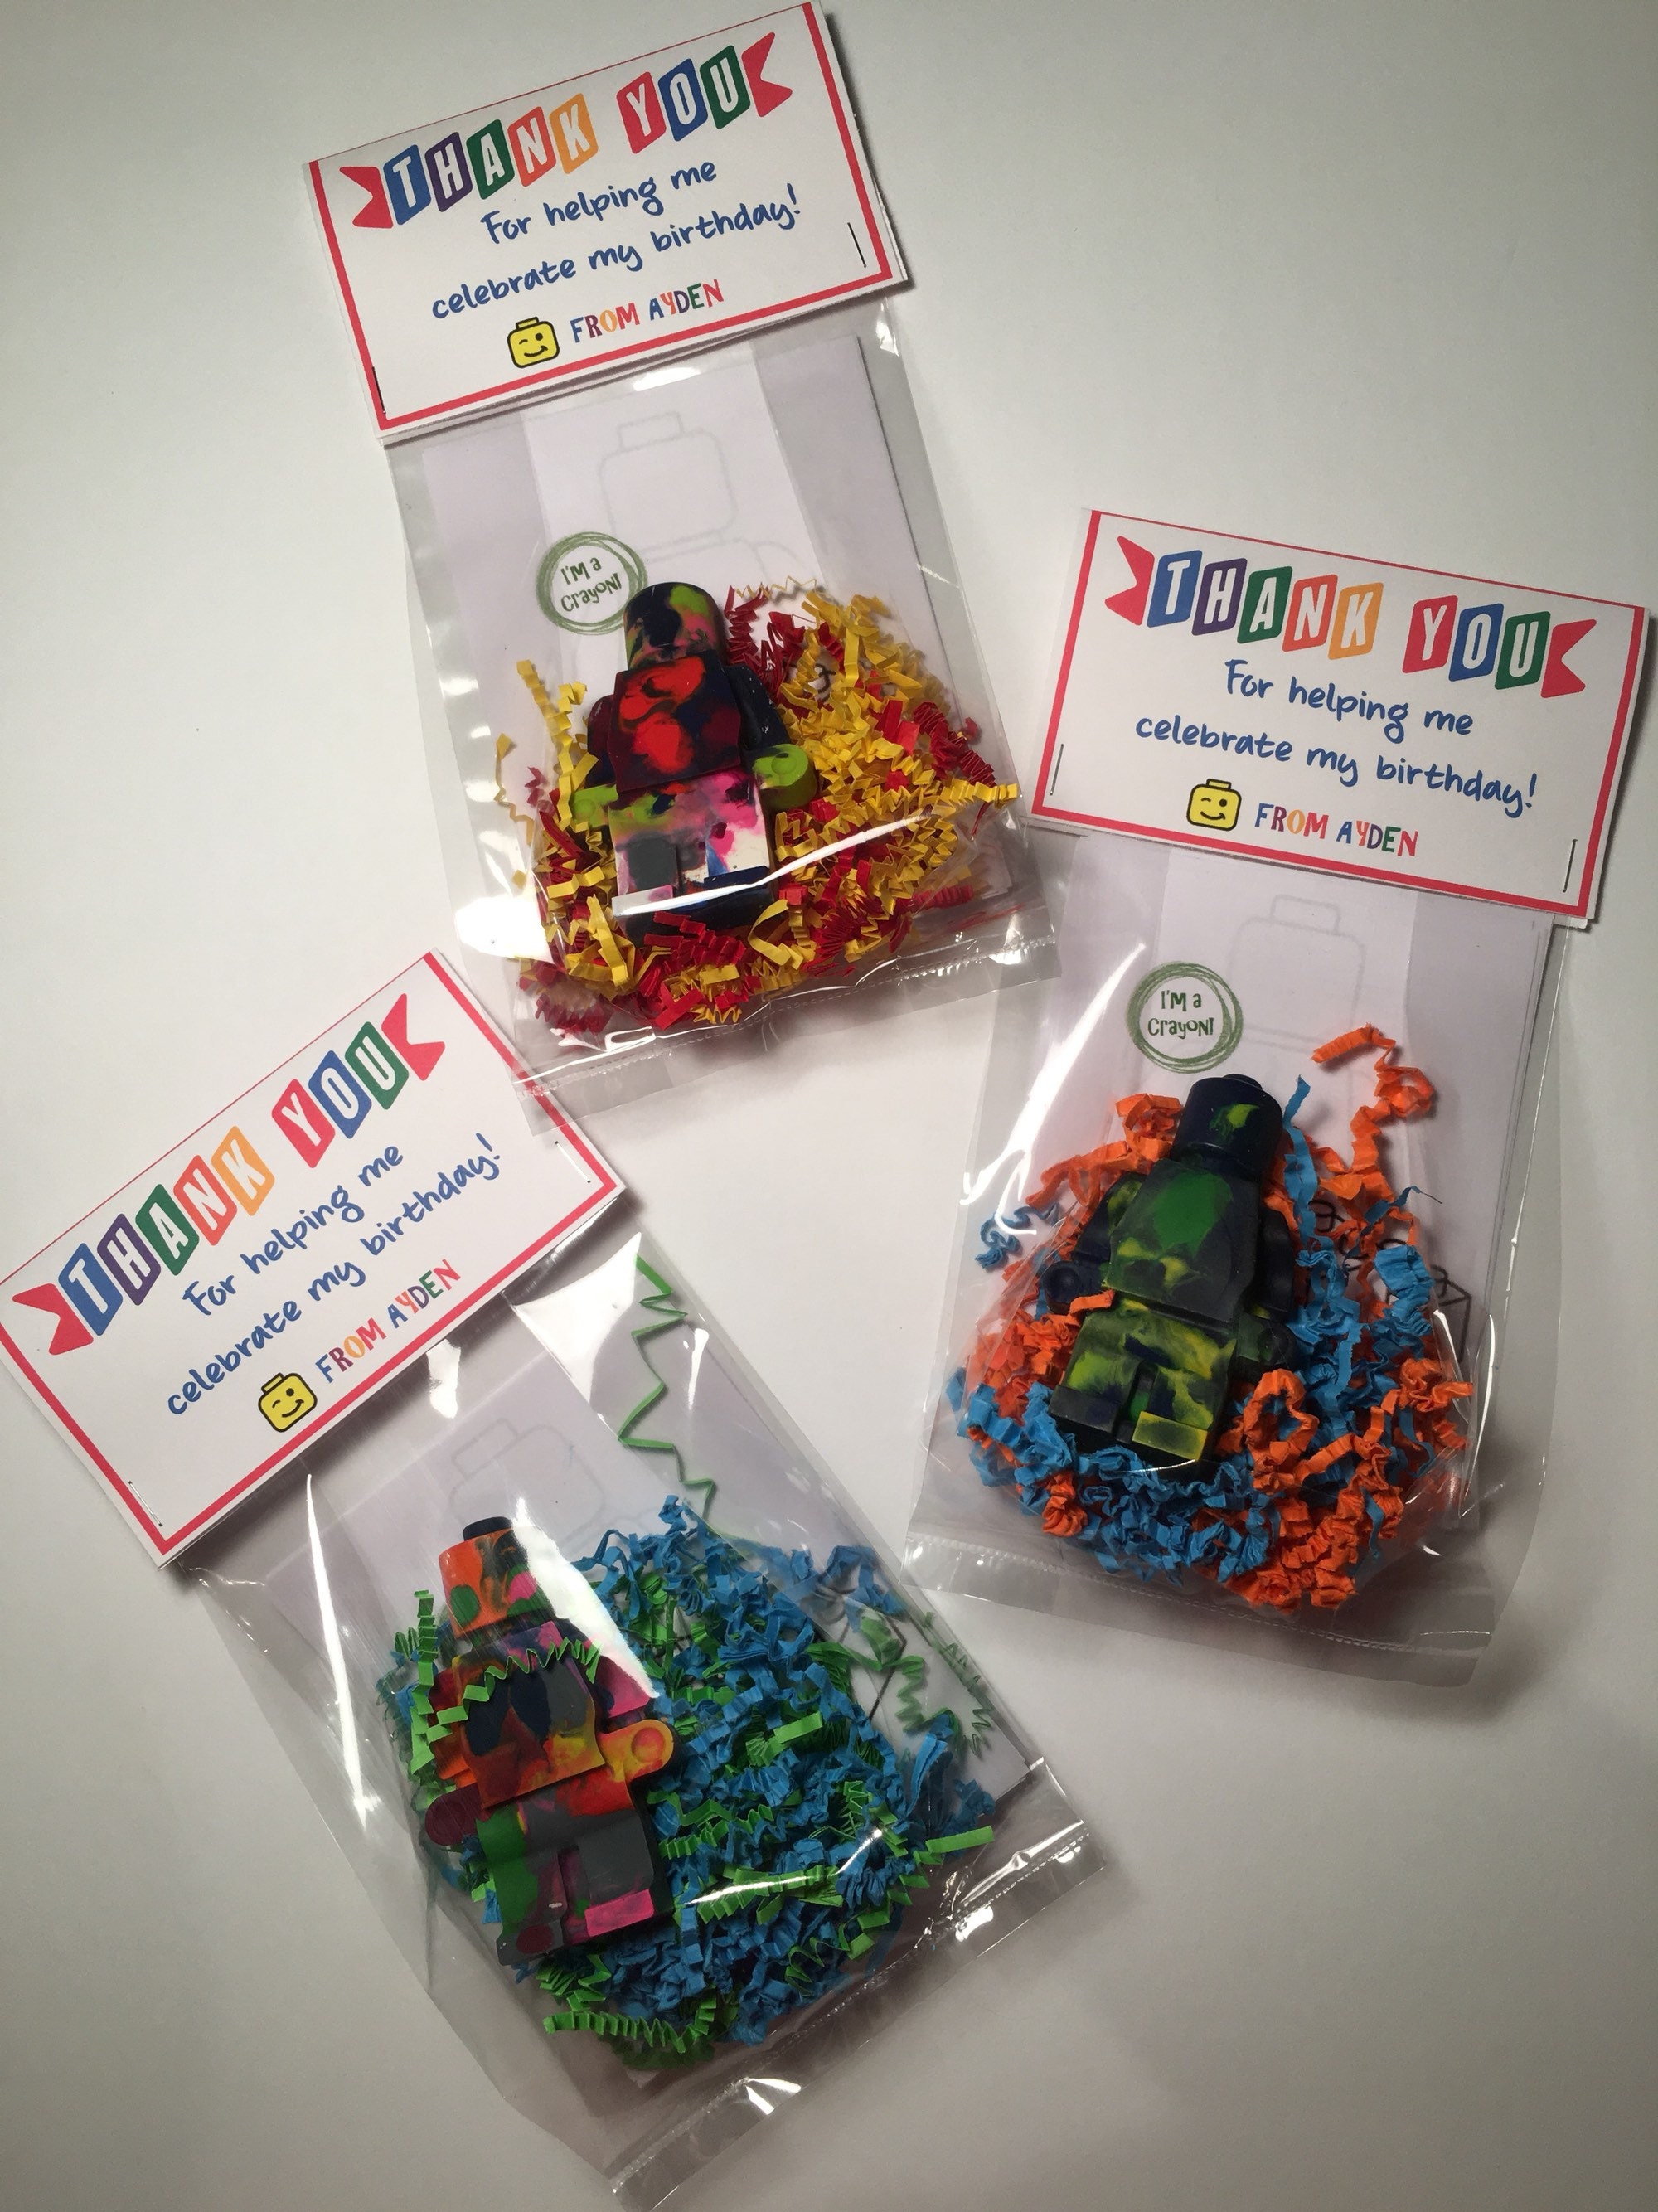 Giant Building Block Man Crayon Party Favours - includes colouring